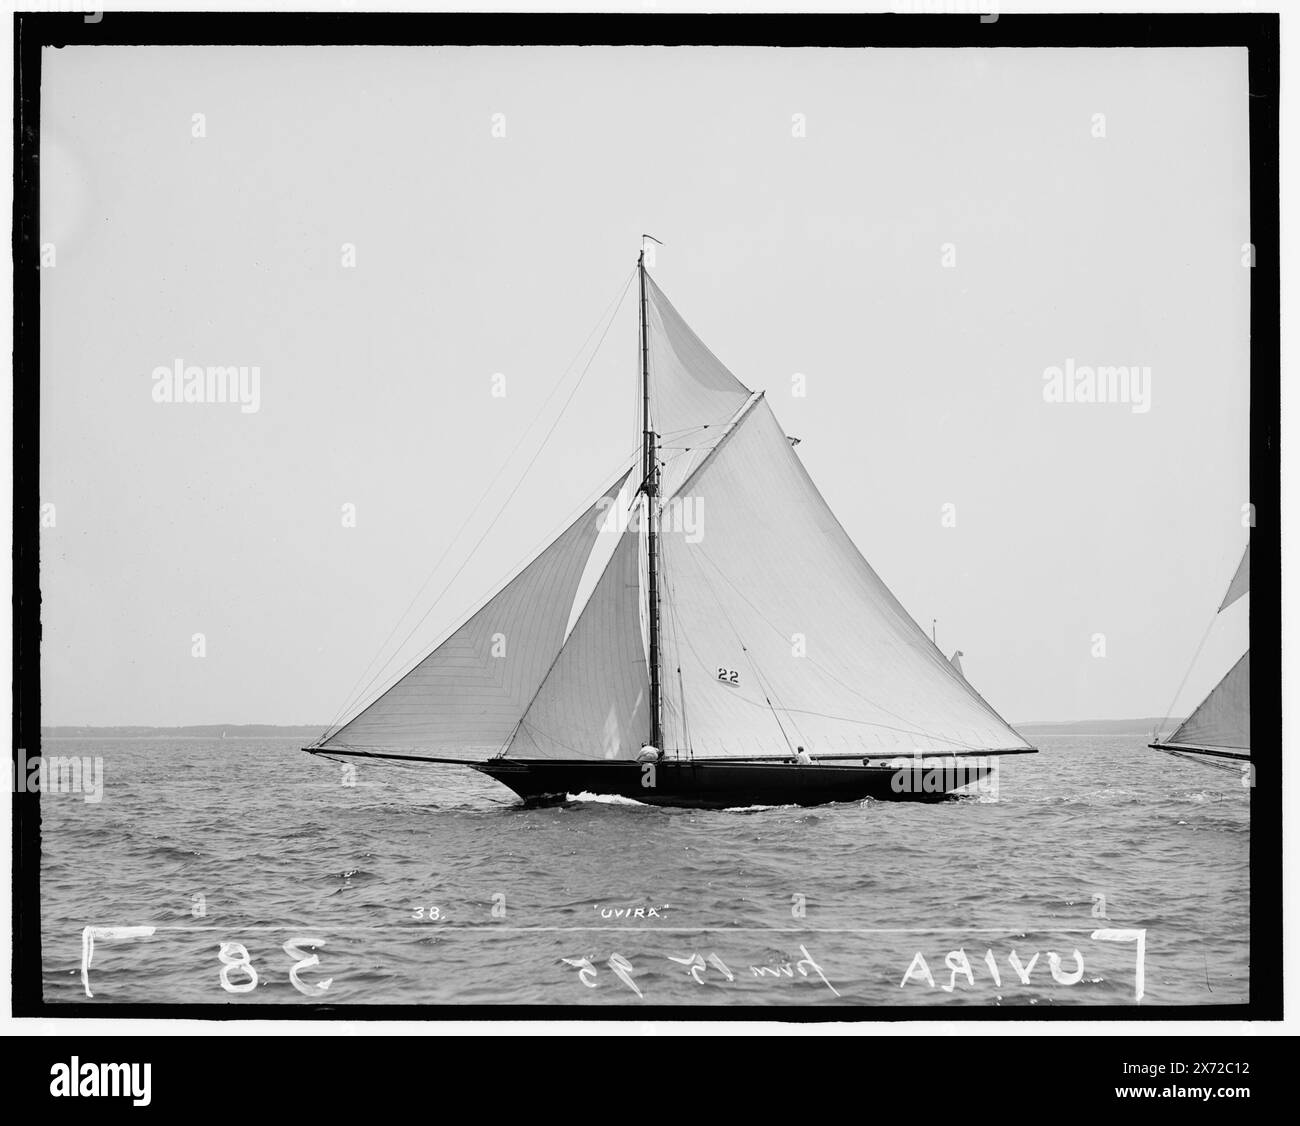 Uvira, Attribution based on style of title and numbering., '38' on negative., No Detroit Publishing Co. no., Gift; State Historical Society of Colorado; 1949,  Uvira (Cutter) , Yachts. Stock Photo